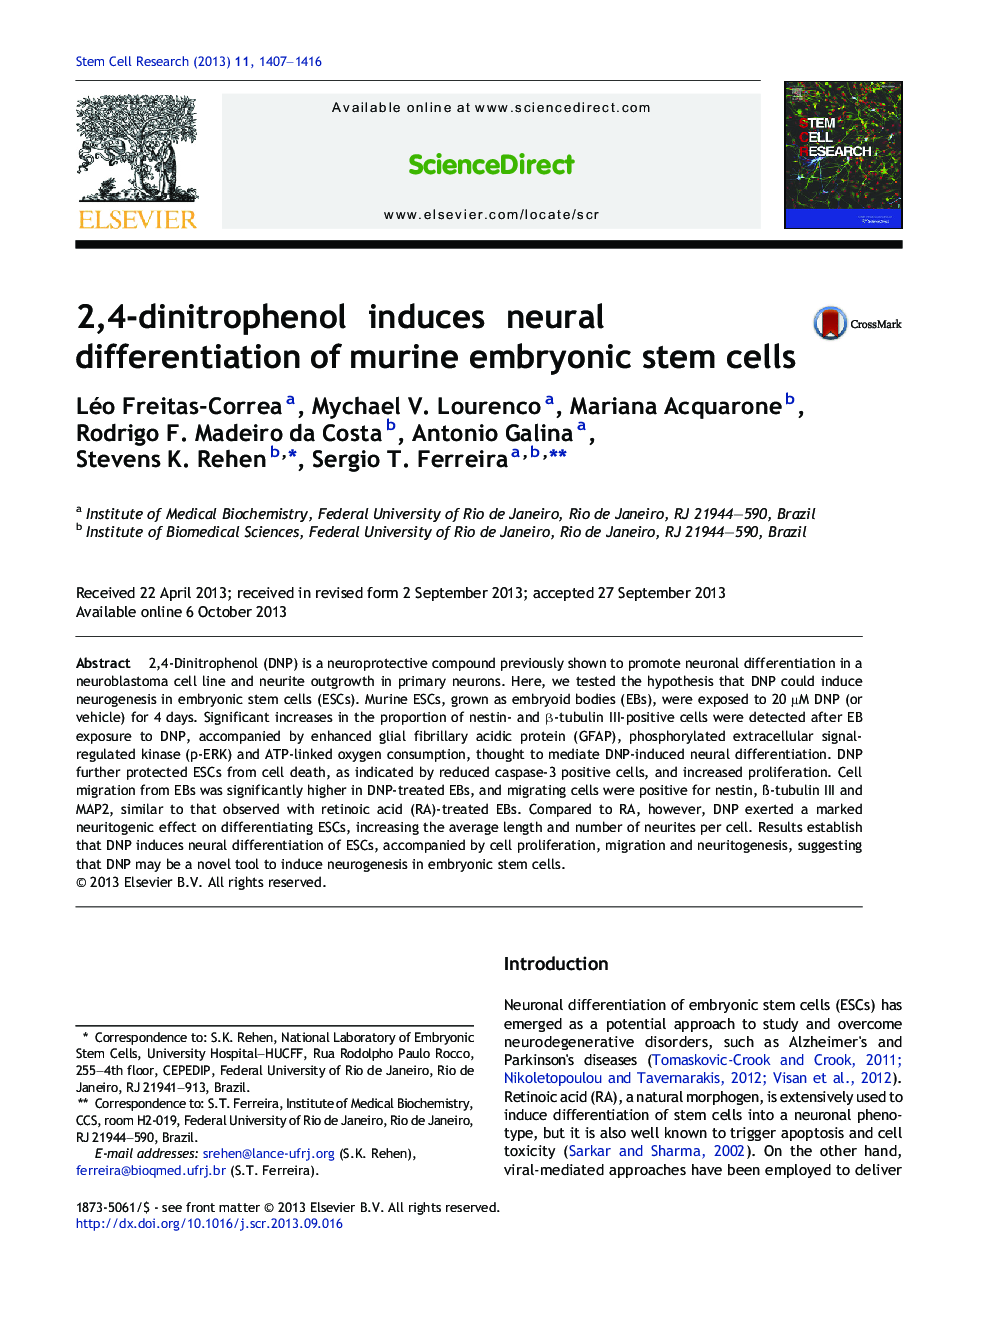 2,4-dinitrophenol induces neural differentiation of murine embryonic stem cells